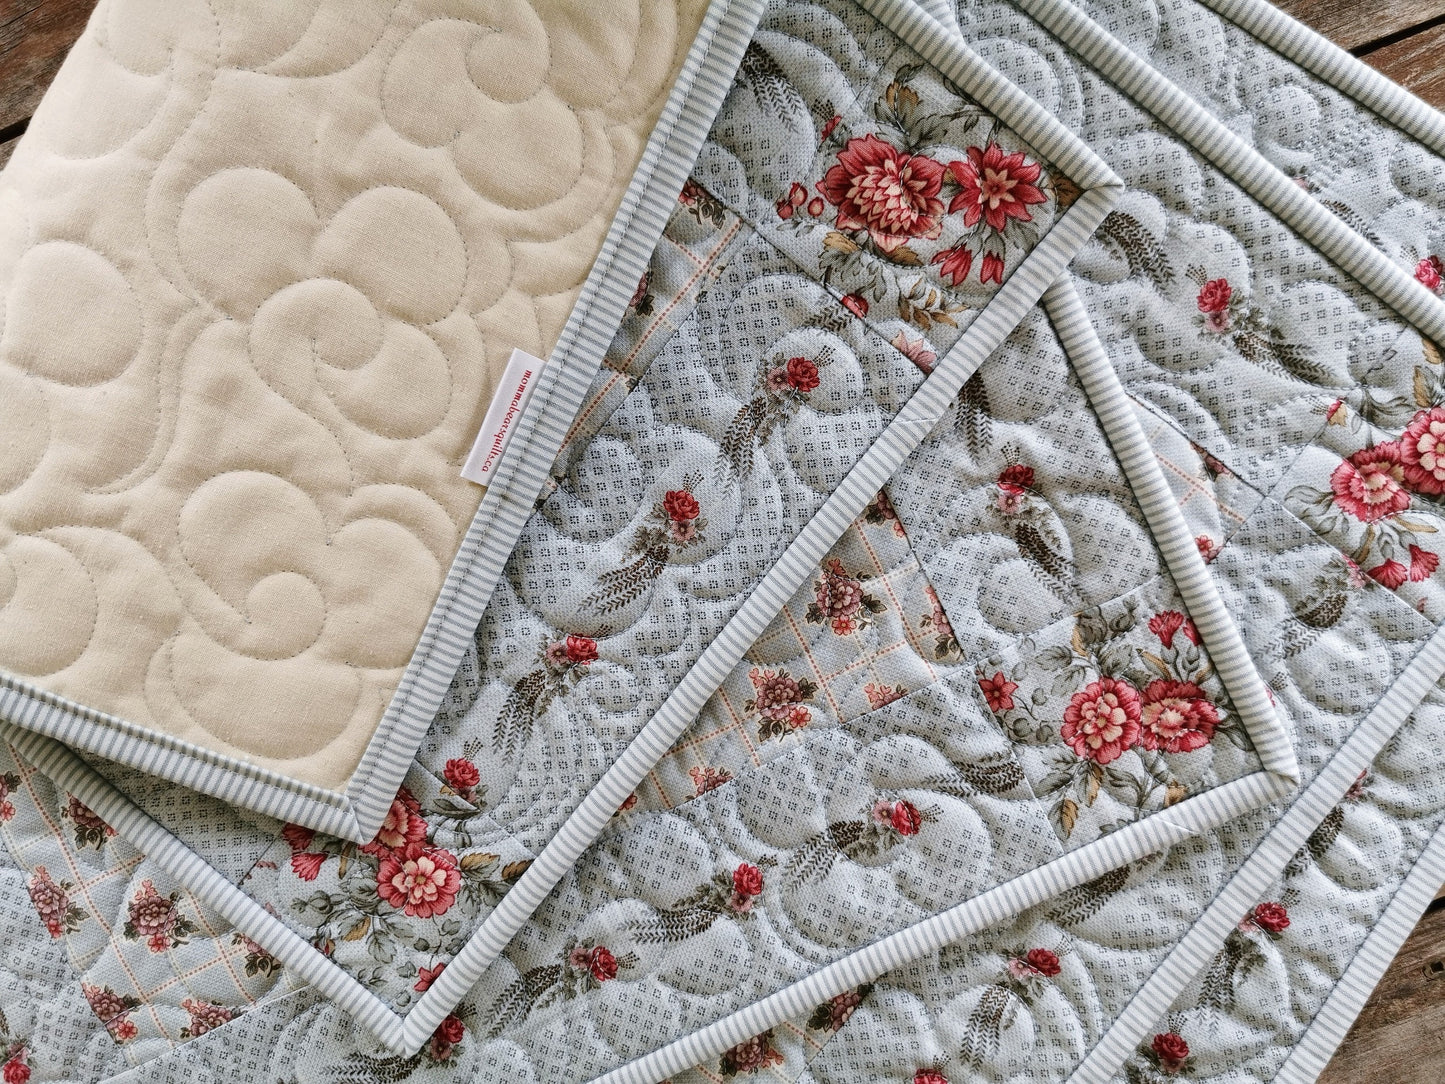 The quilted placemats have a plain muslin backing shown here. 